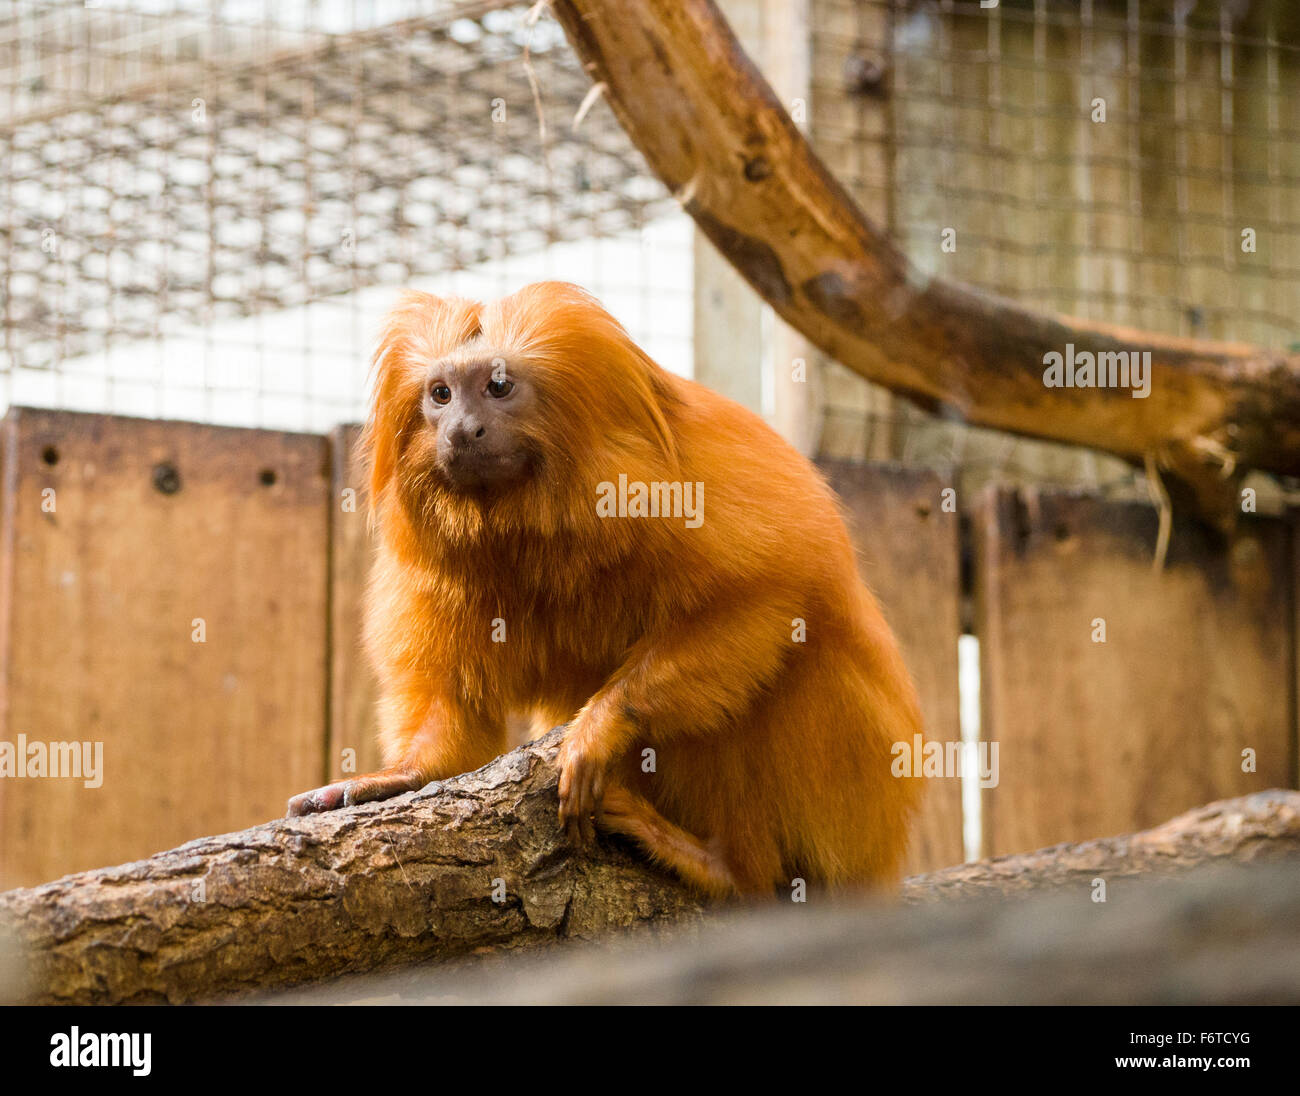 A Caged Golden Lion Tamarin. A small tamarin monkey crouches on a branch in its cage. Stock Photo